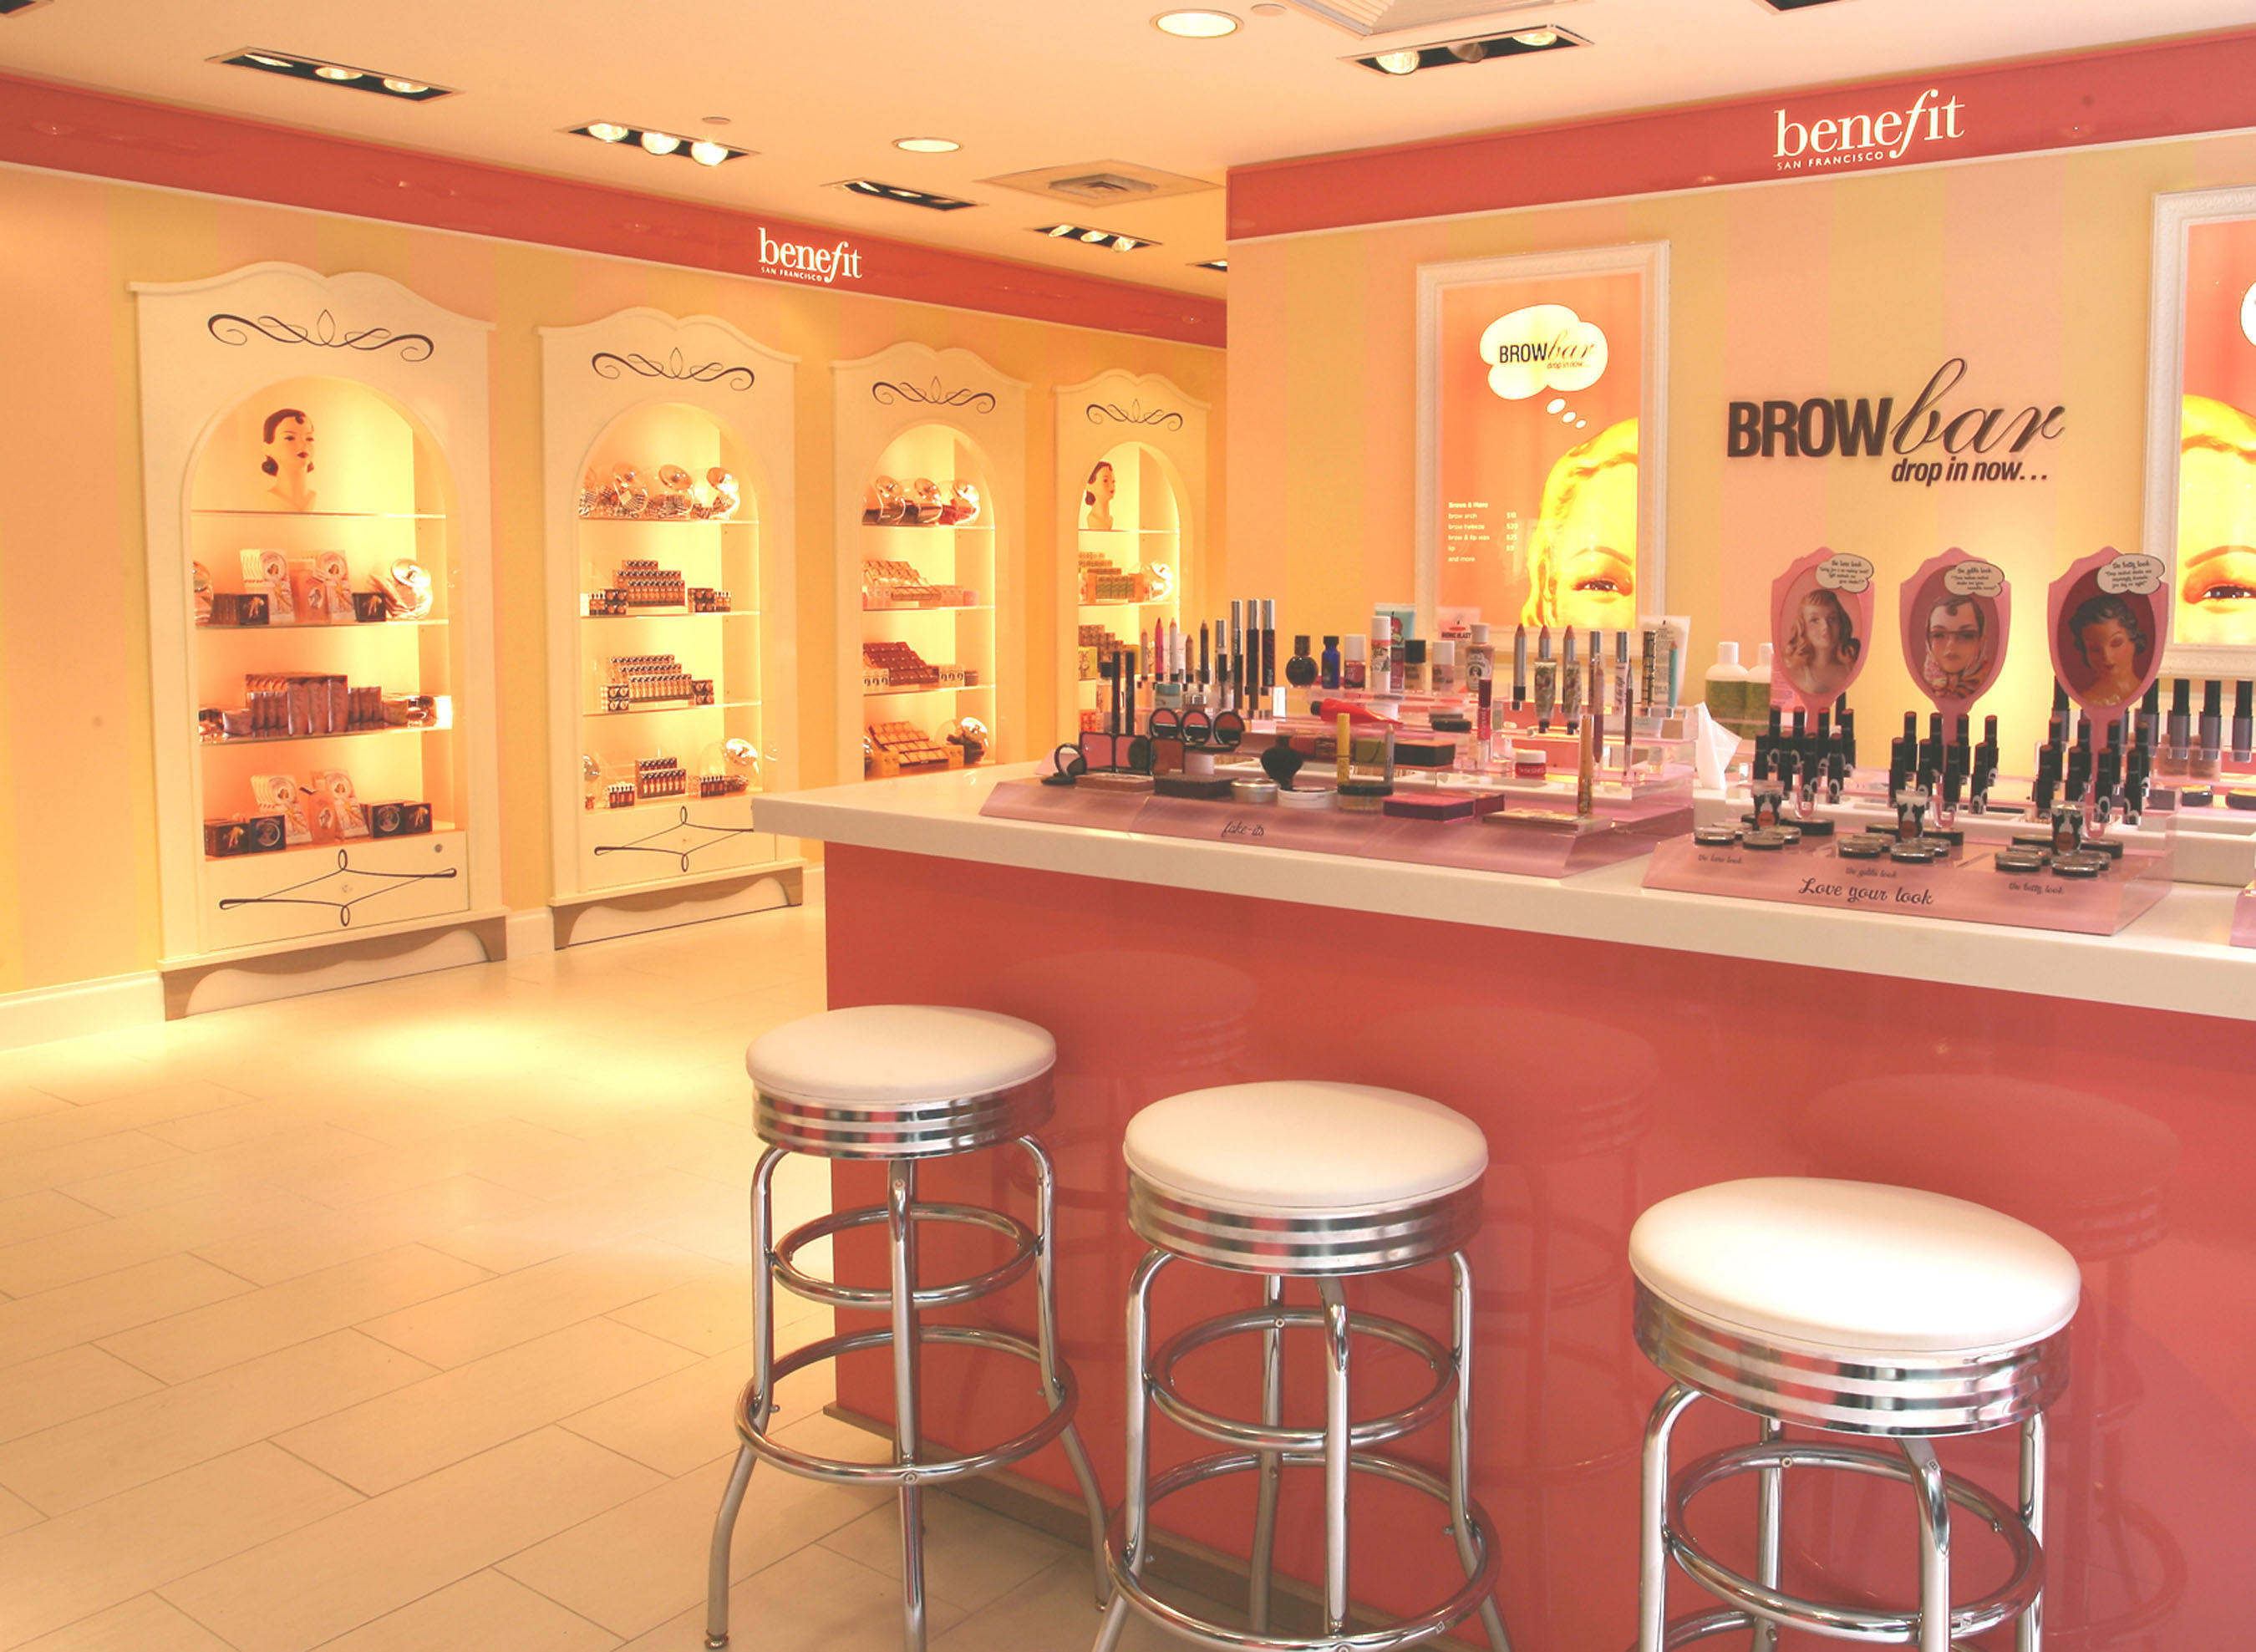 Benefit Brow Bar  Everything YOU Need To Know 